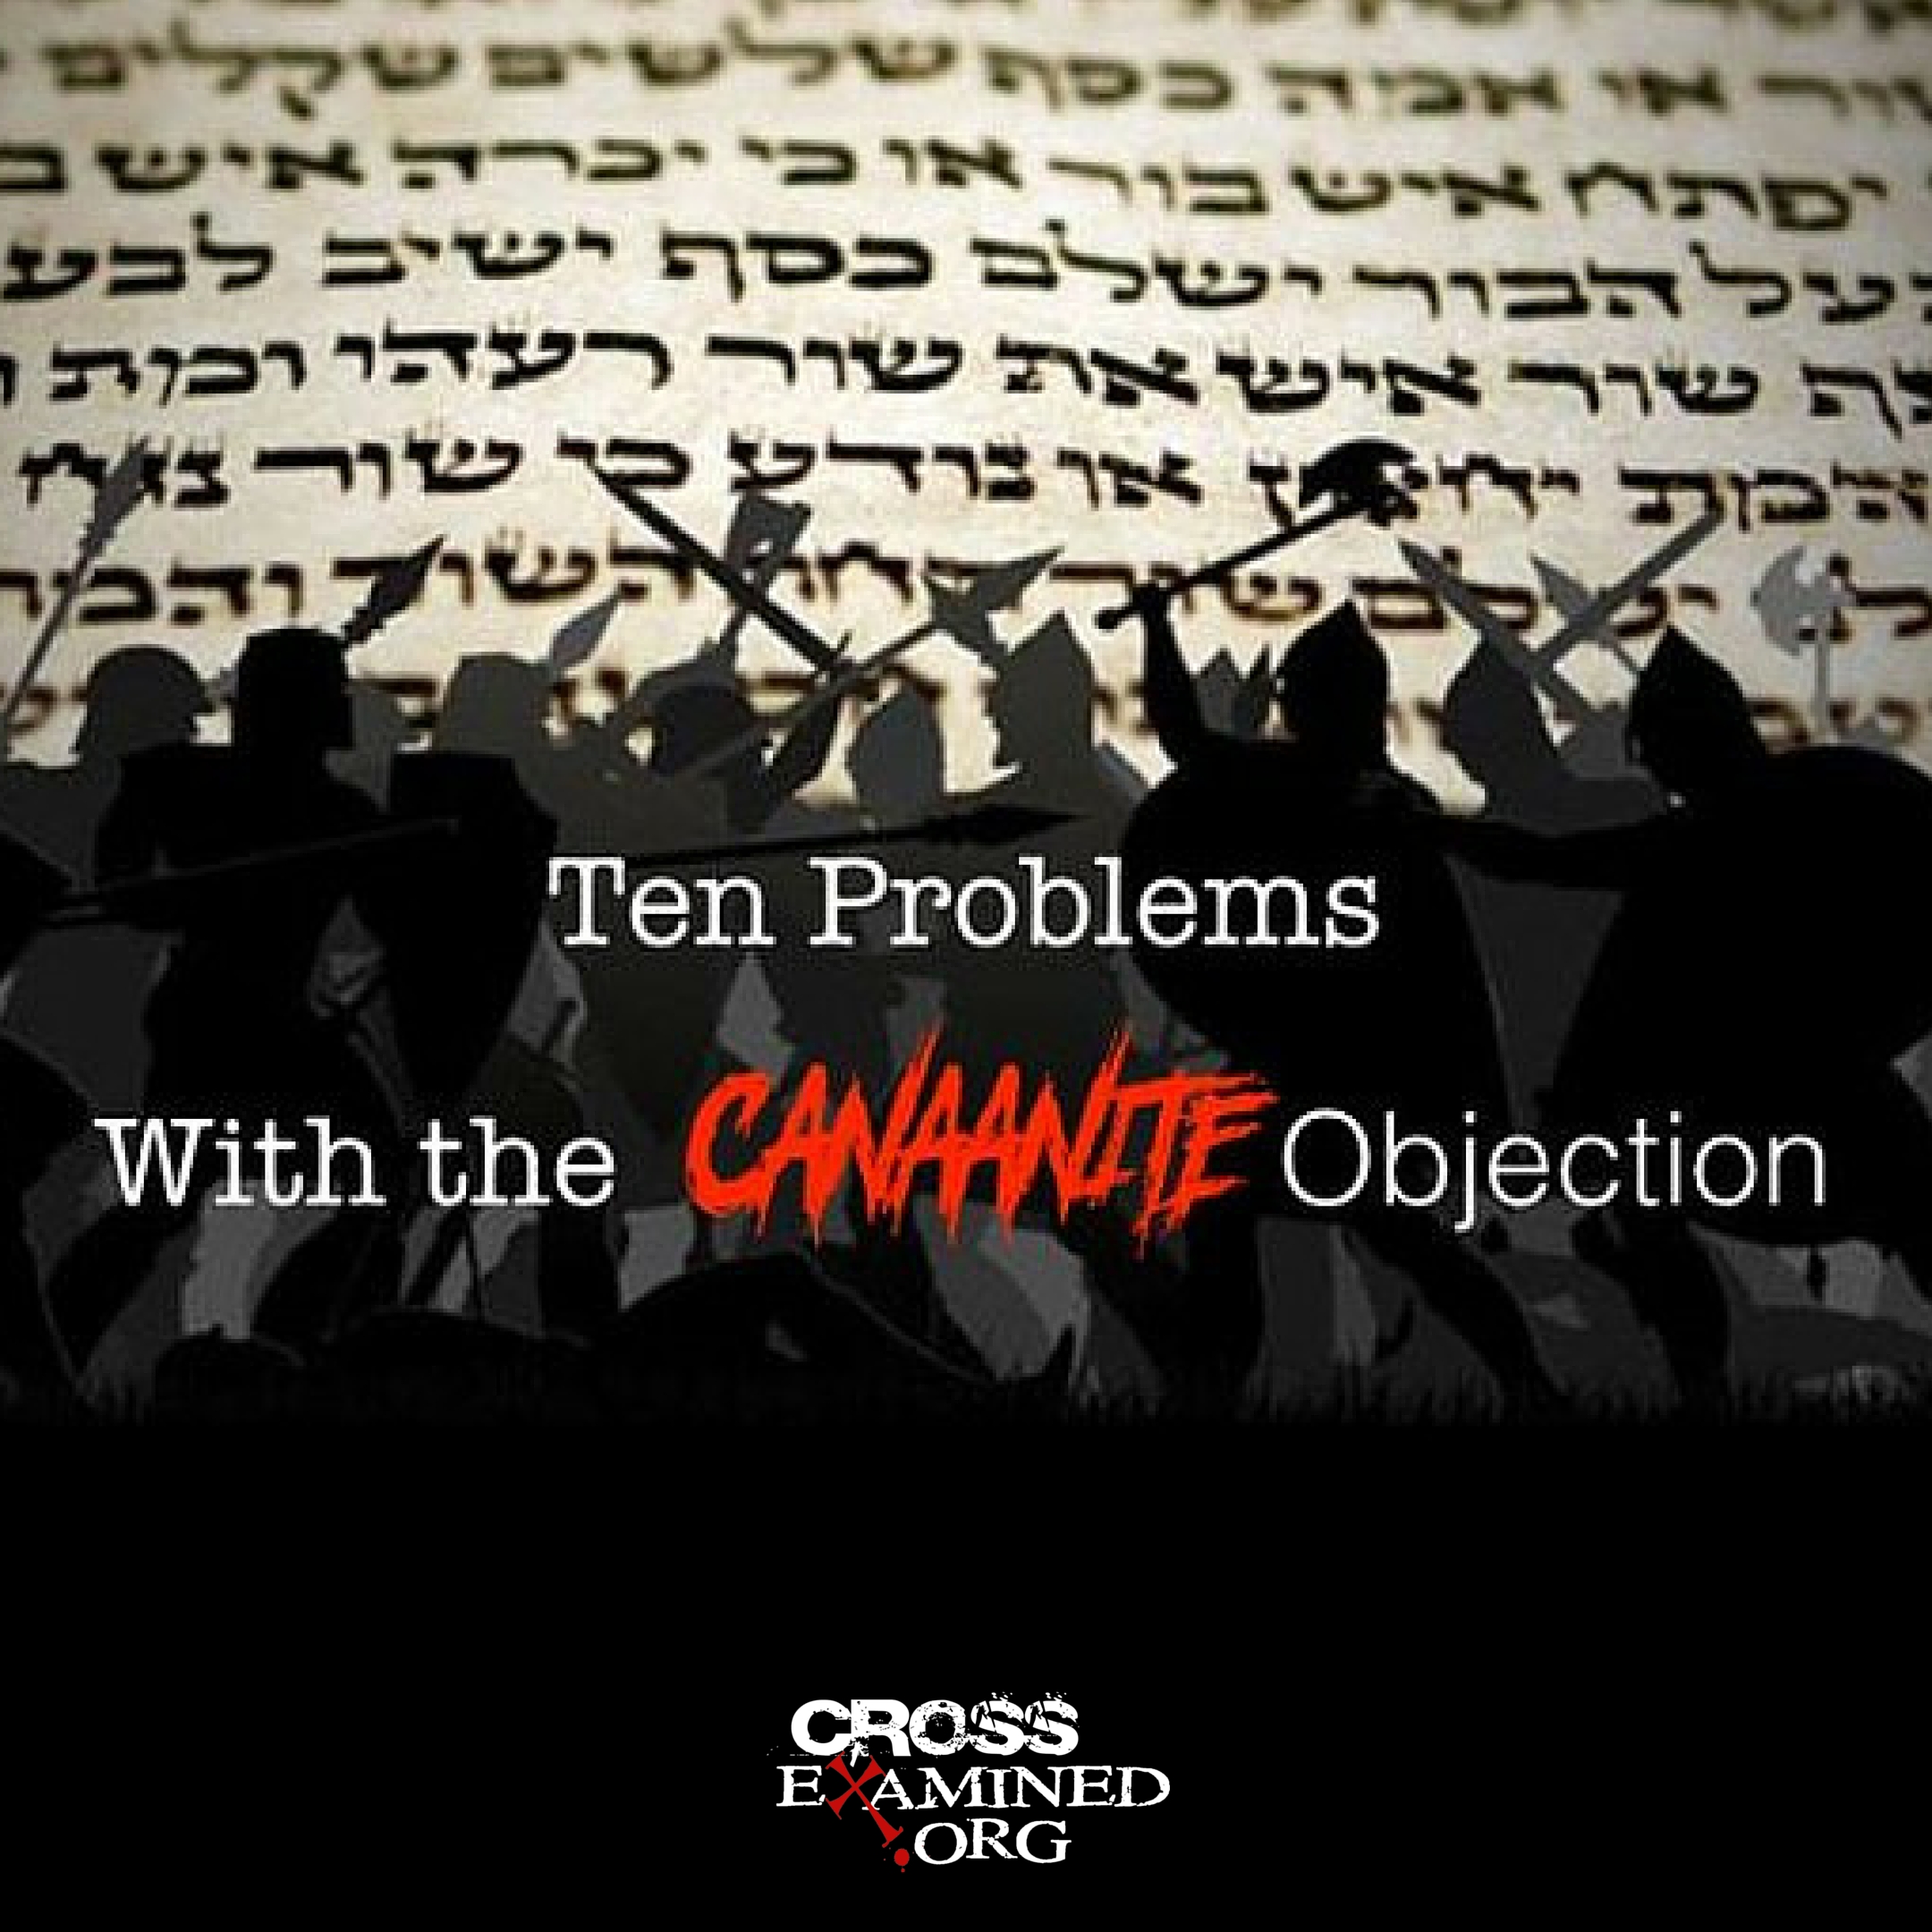 TEN Problems with the Canaanite Objection